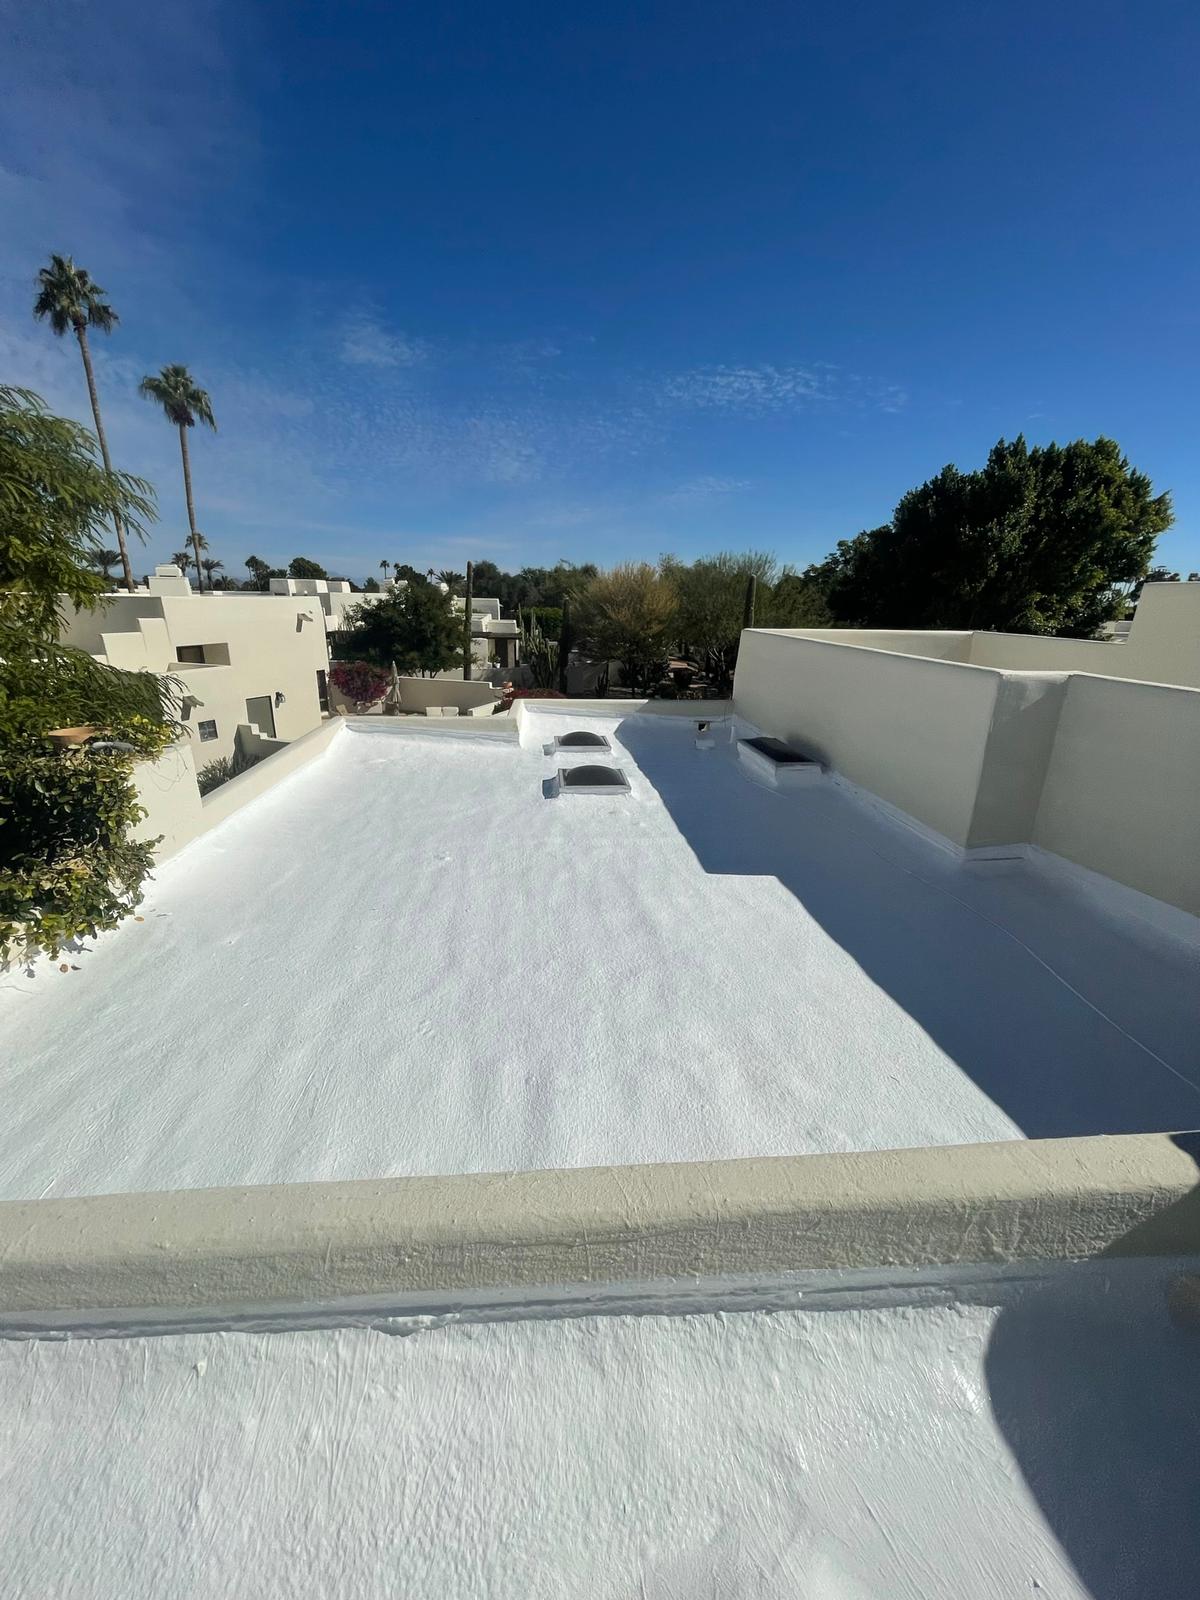 Detailed image of a spray foam roof on a residential building in North Phoenix.